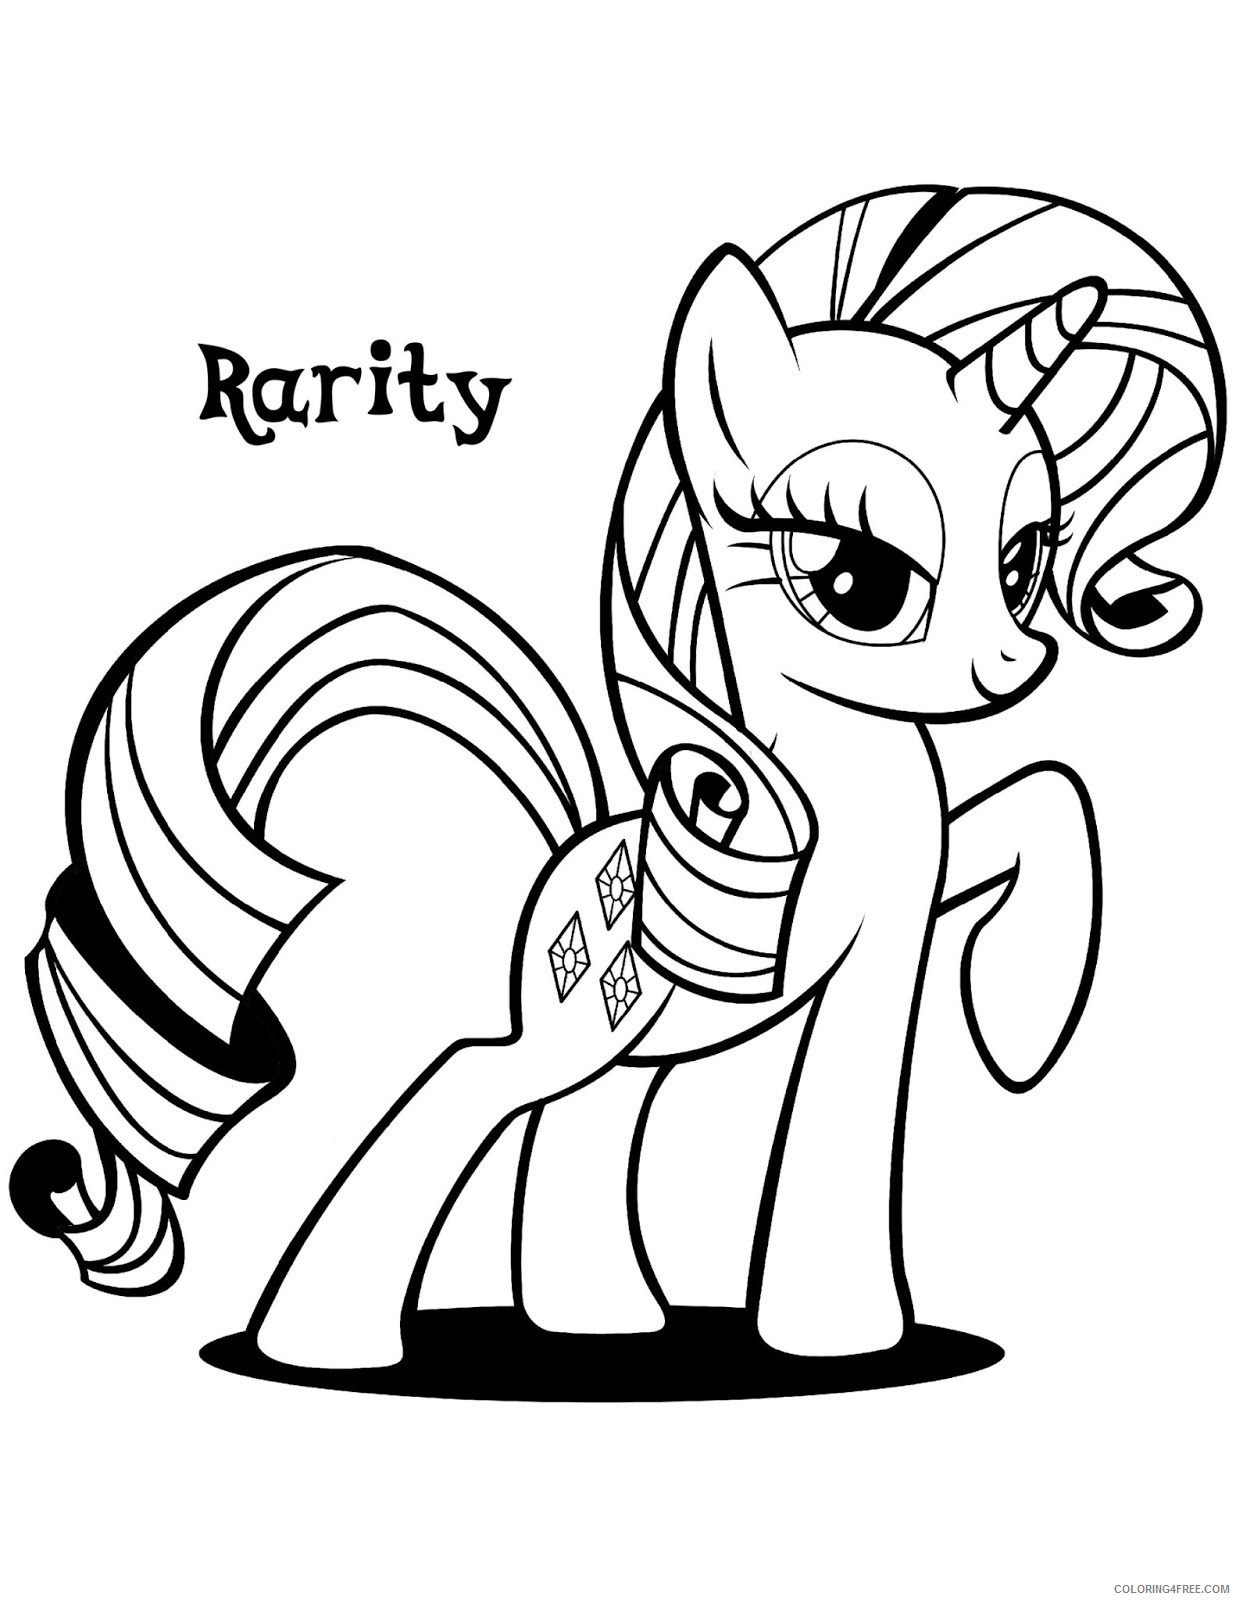 My Little Pony Coloring Pages Cartoons My Little Pony Rarity Printable 2020 4516 Coloring4free